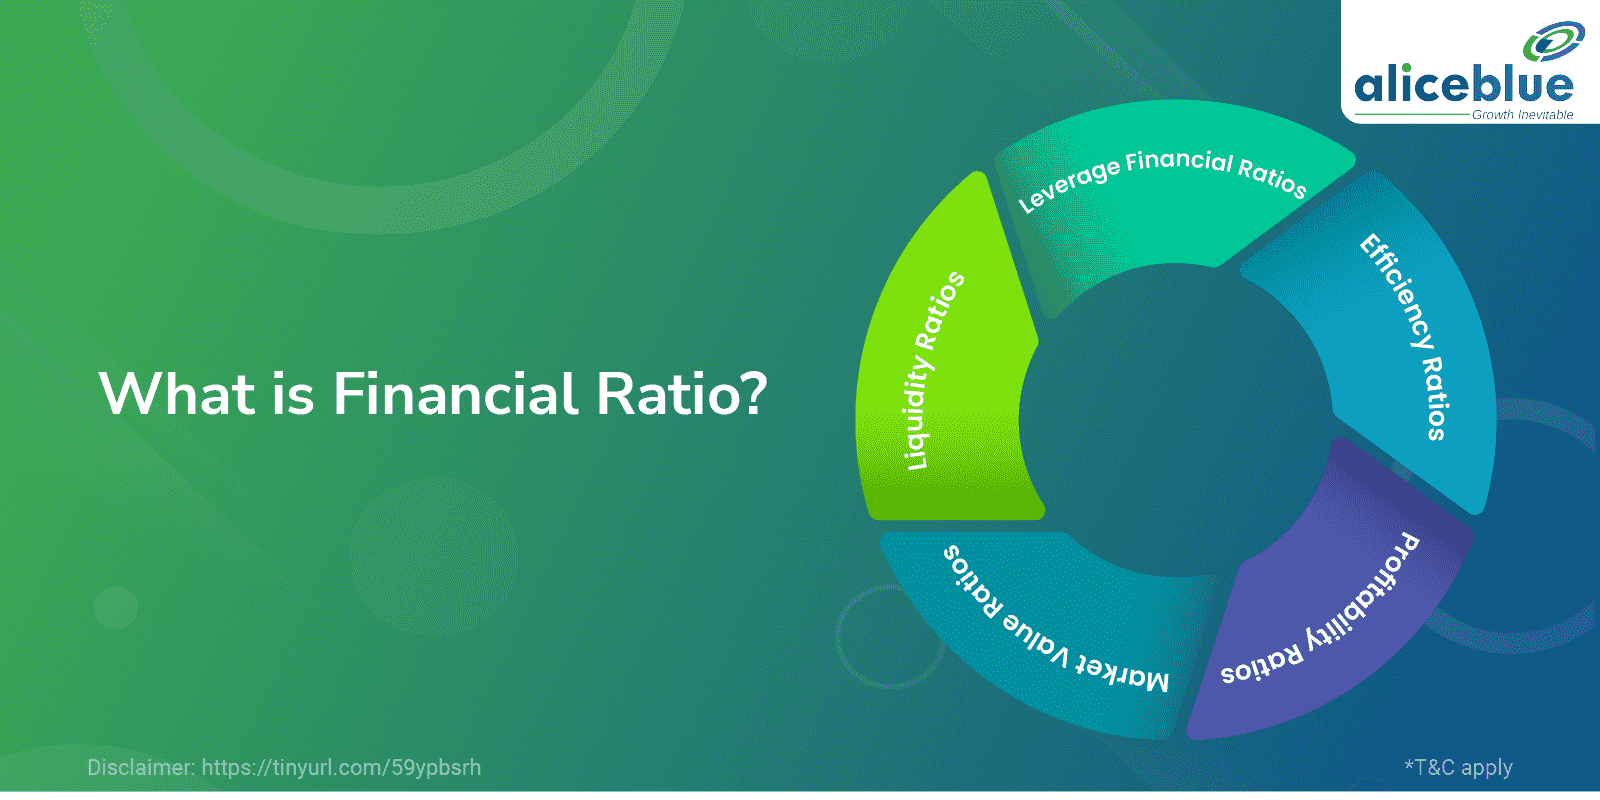 What is Financial Ratio?